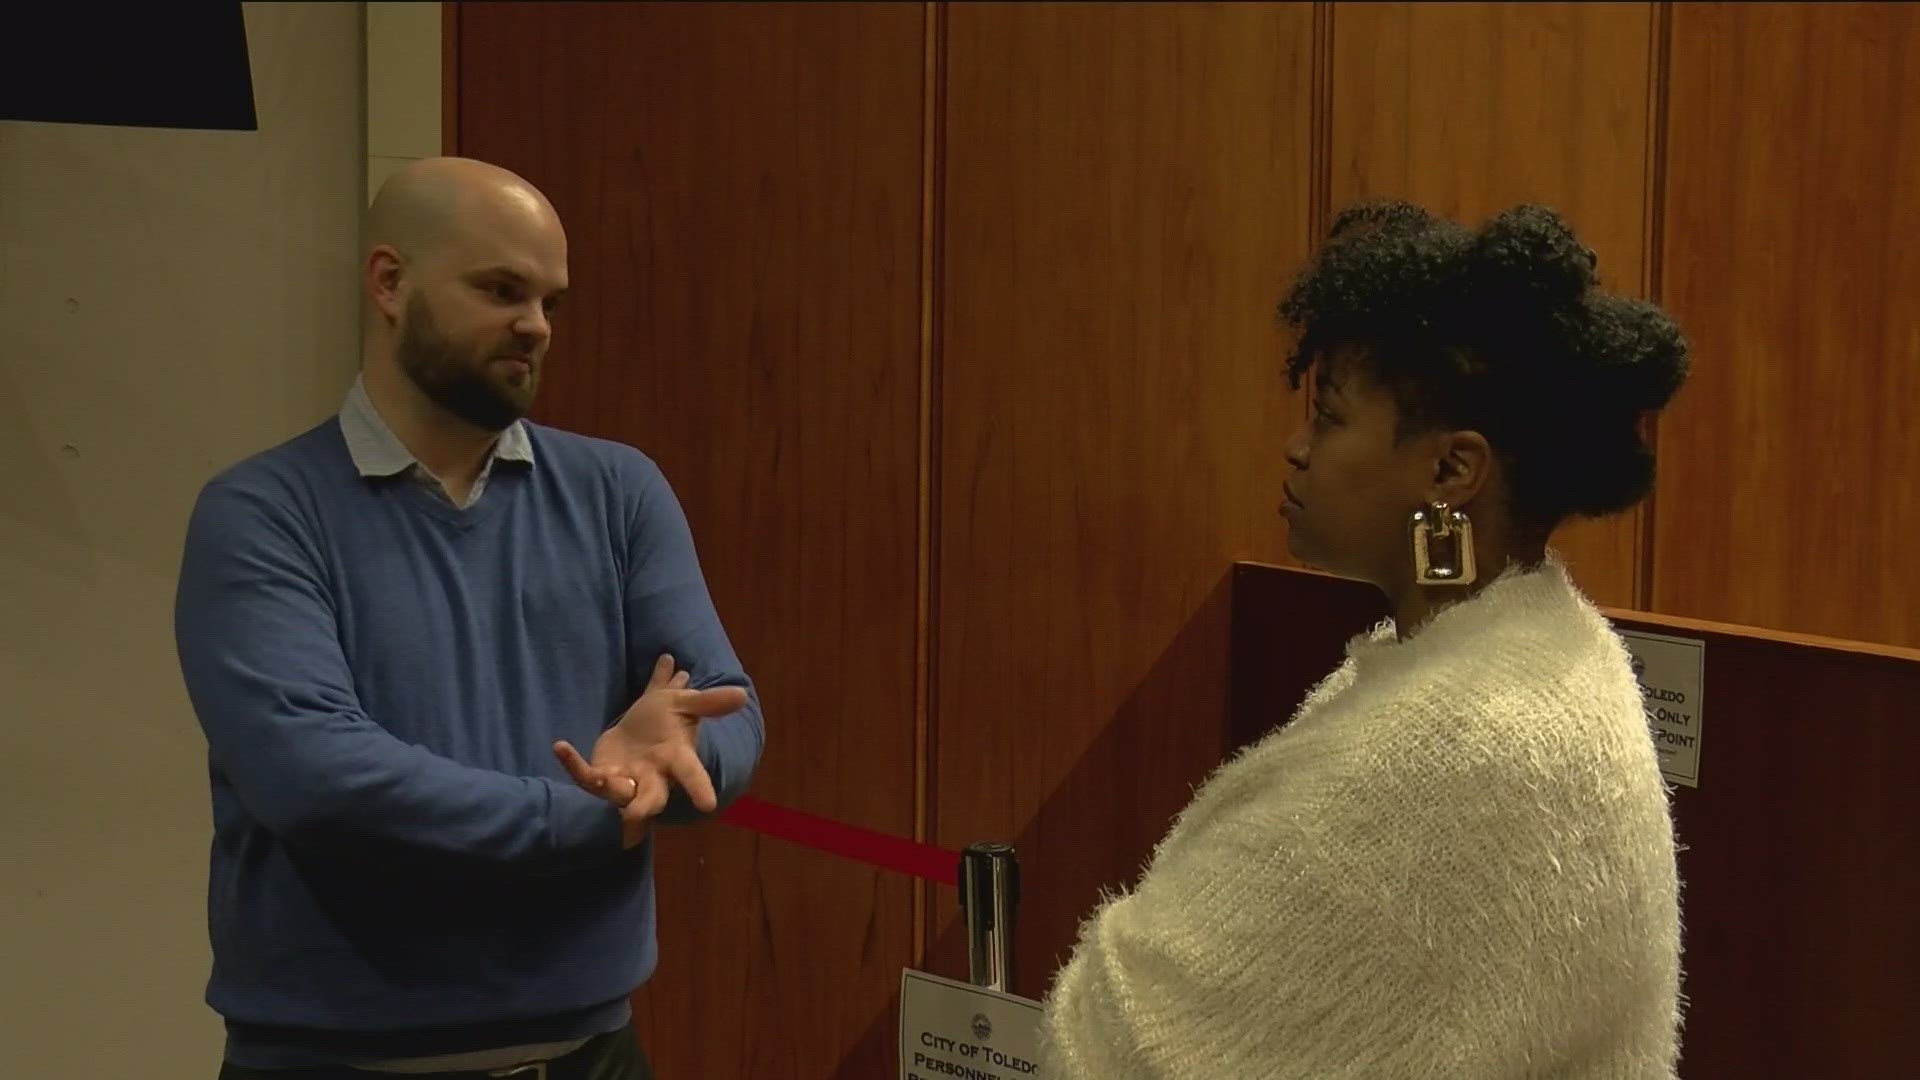 Newly sworn-in council members Brittany Jones and Mac Driscoll both said they are committed to helping address the issue that has plagued the city for years.